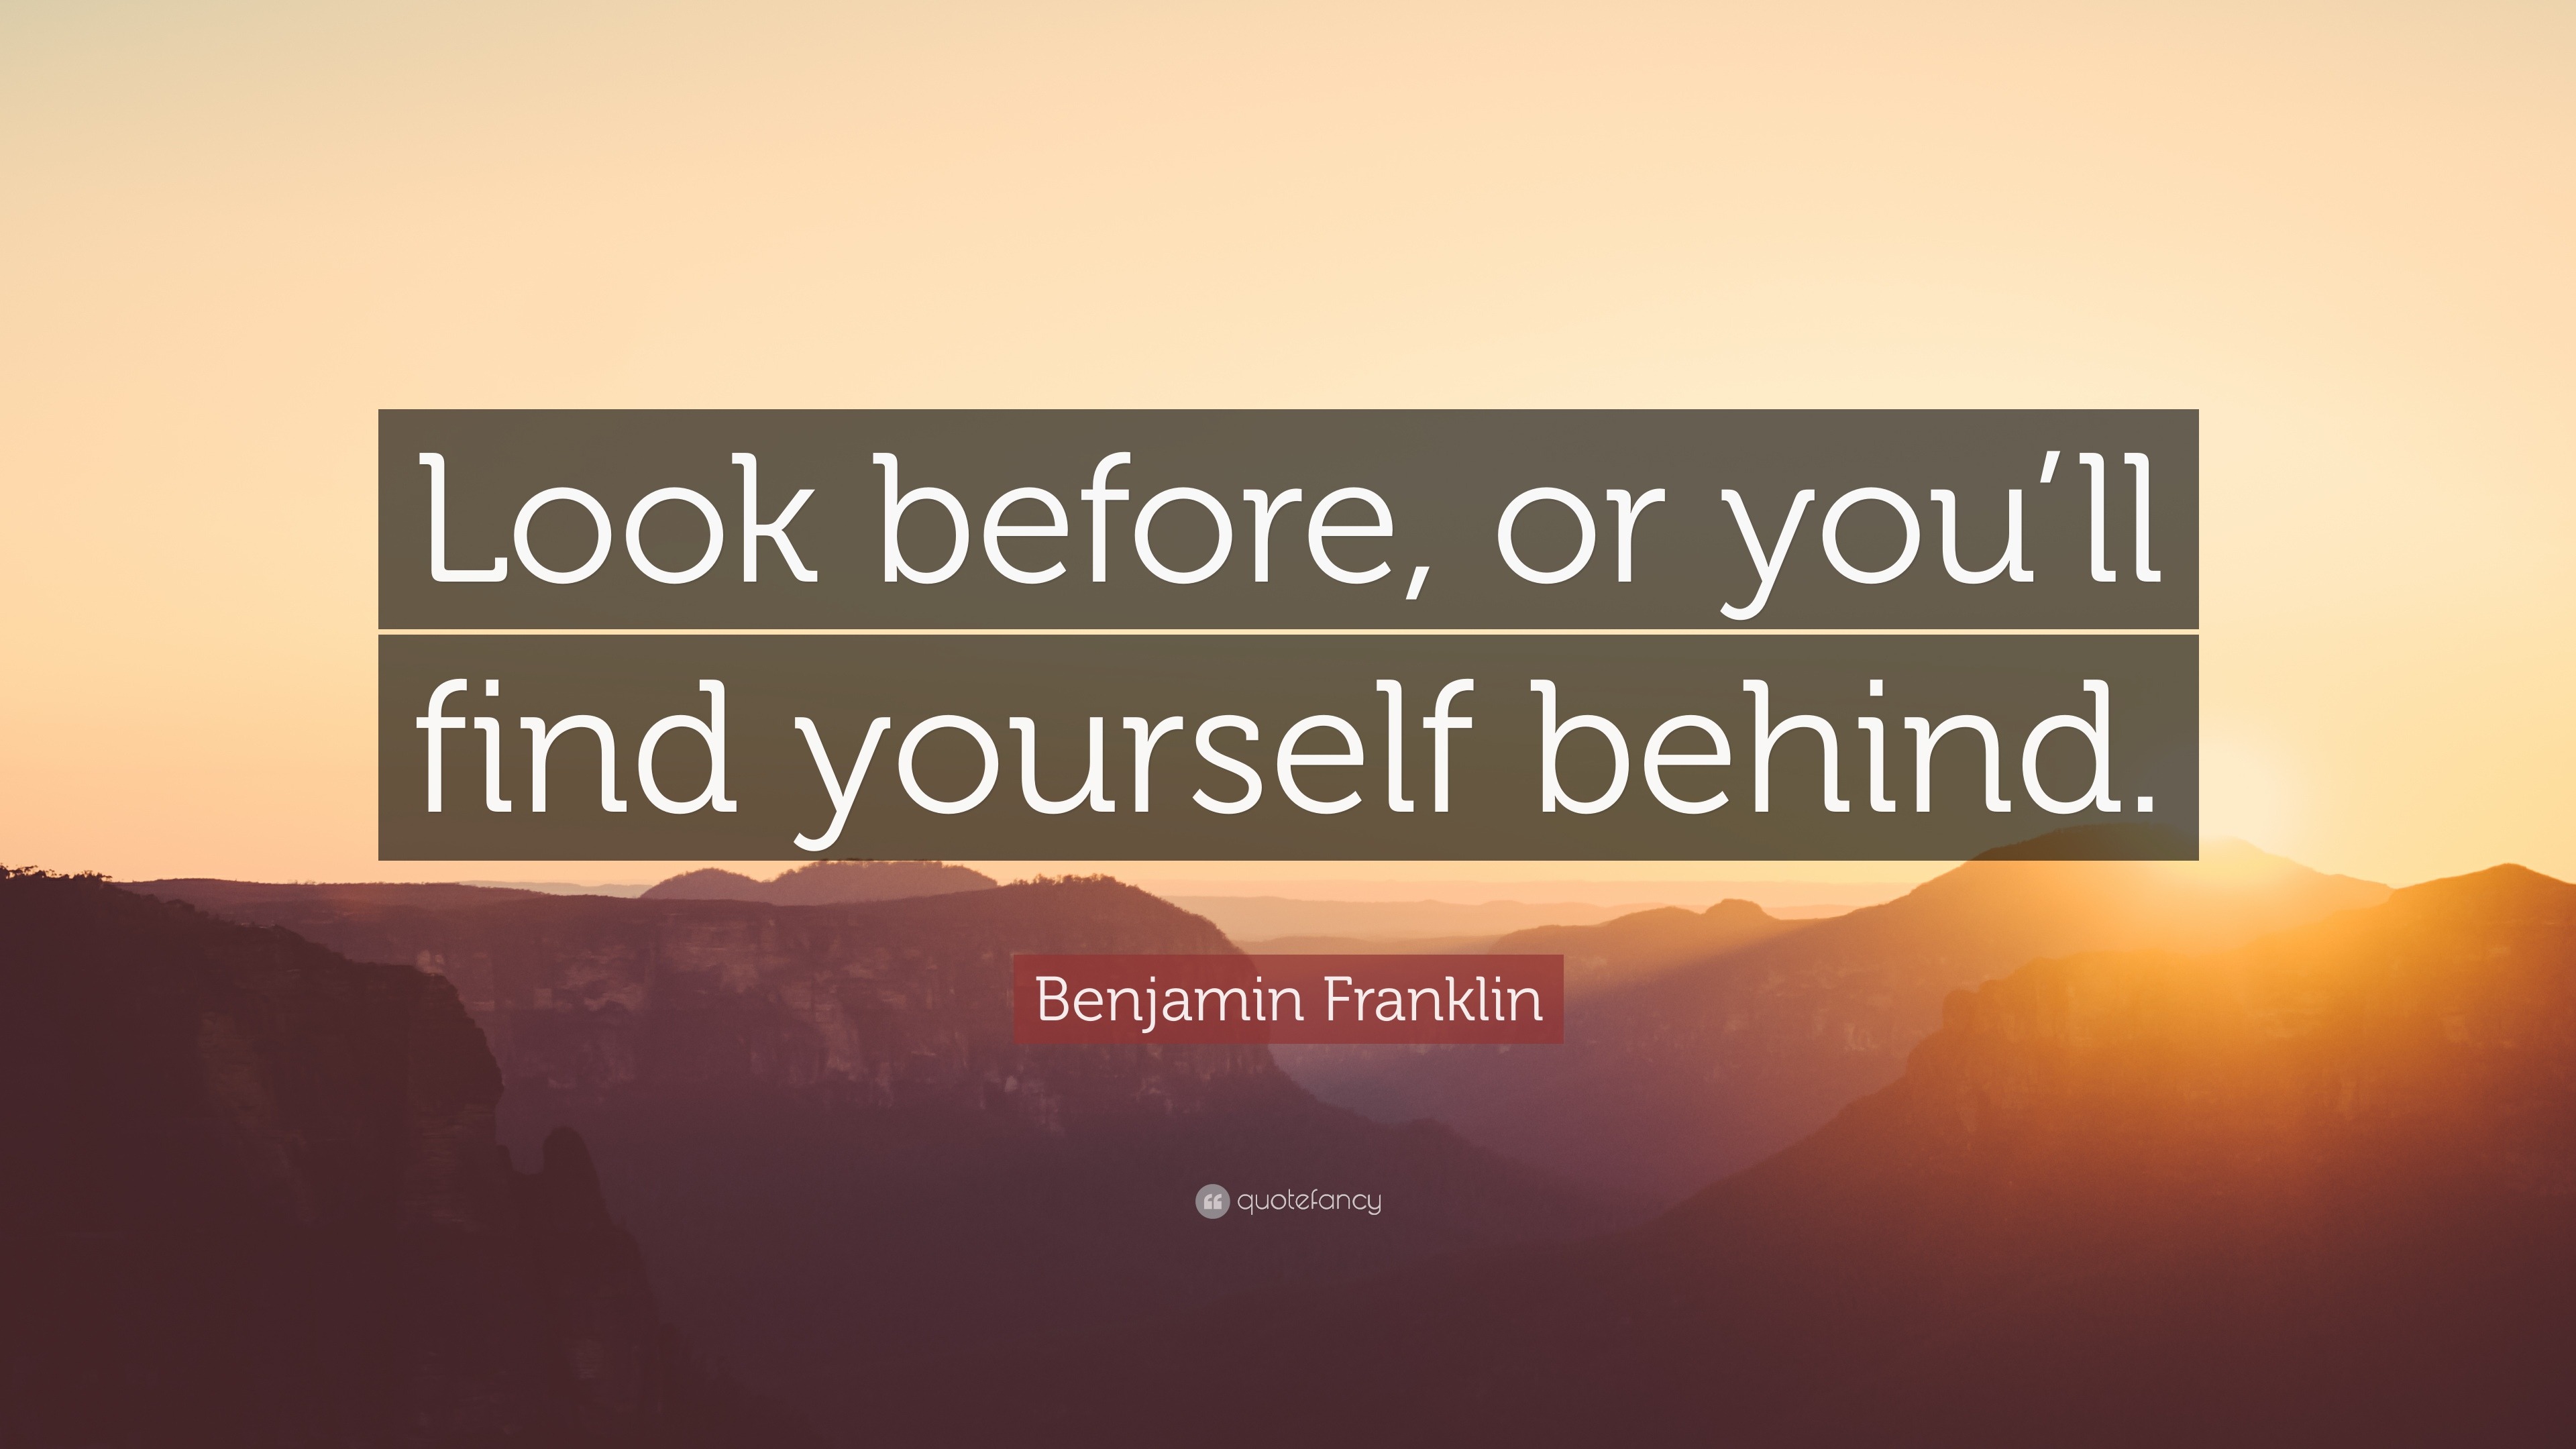 Benjamin Franklin Quote: “Look before, or you’ll find yourself behind.” Look Before Or You'll Find Yourself Behind